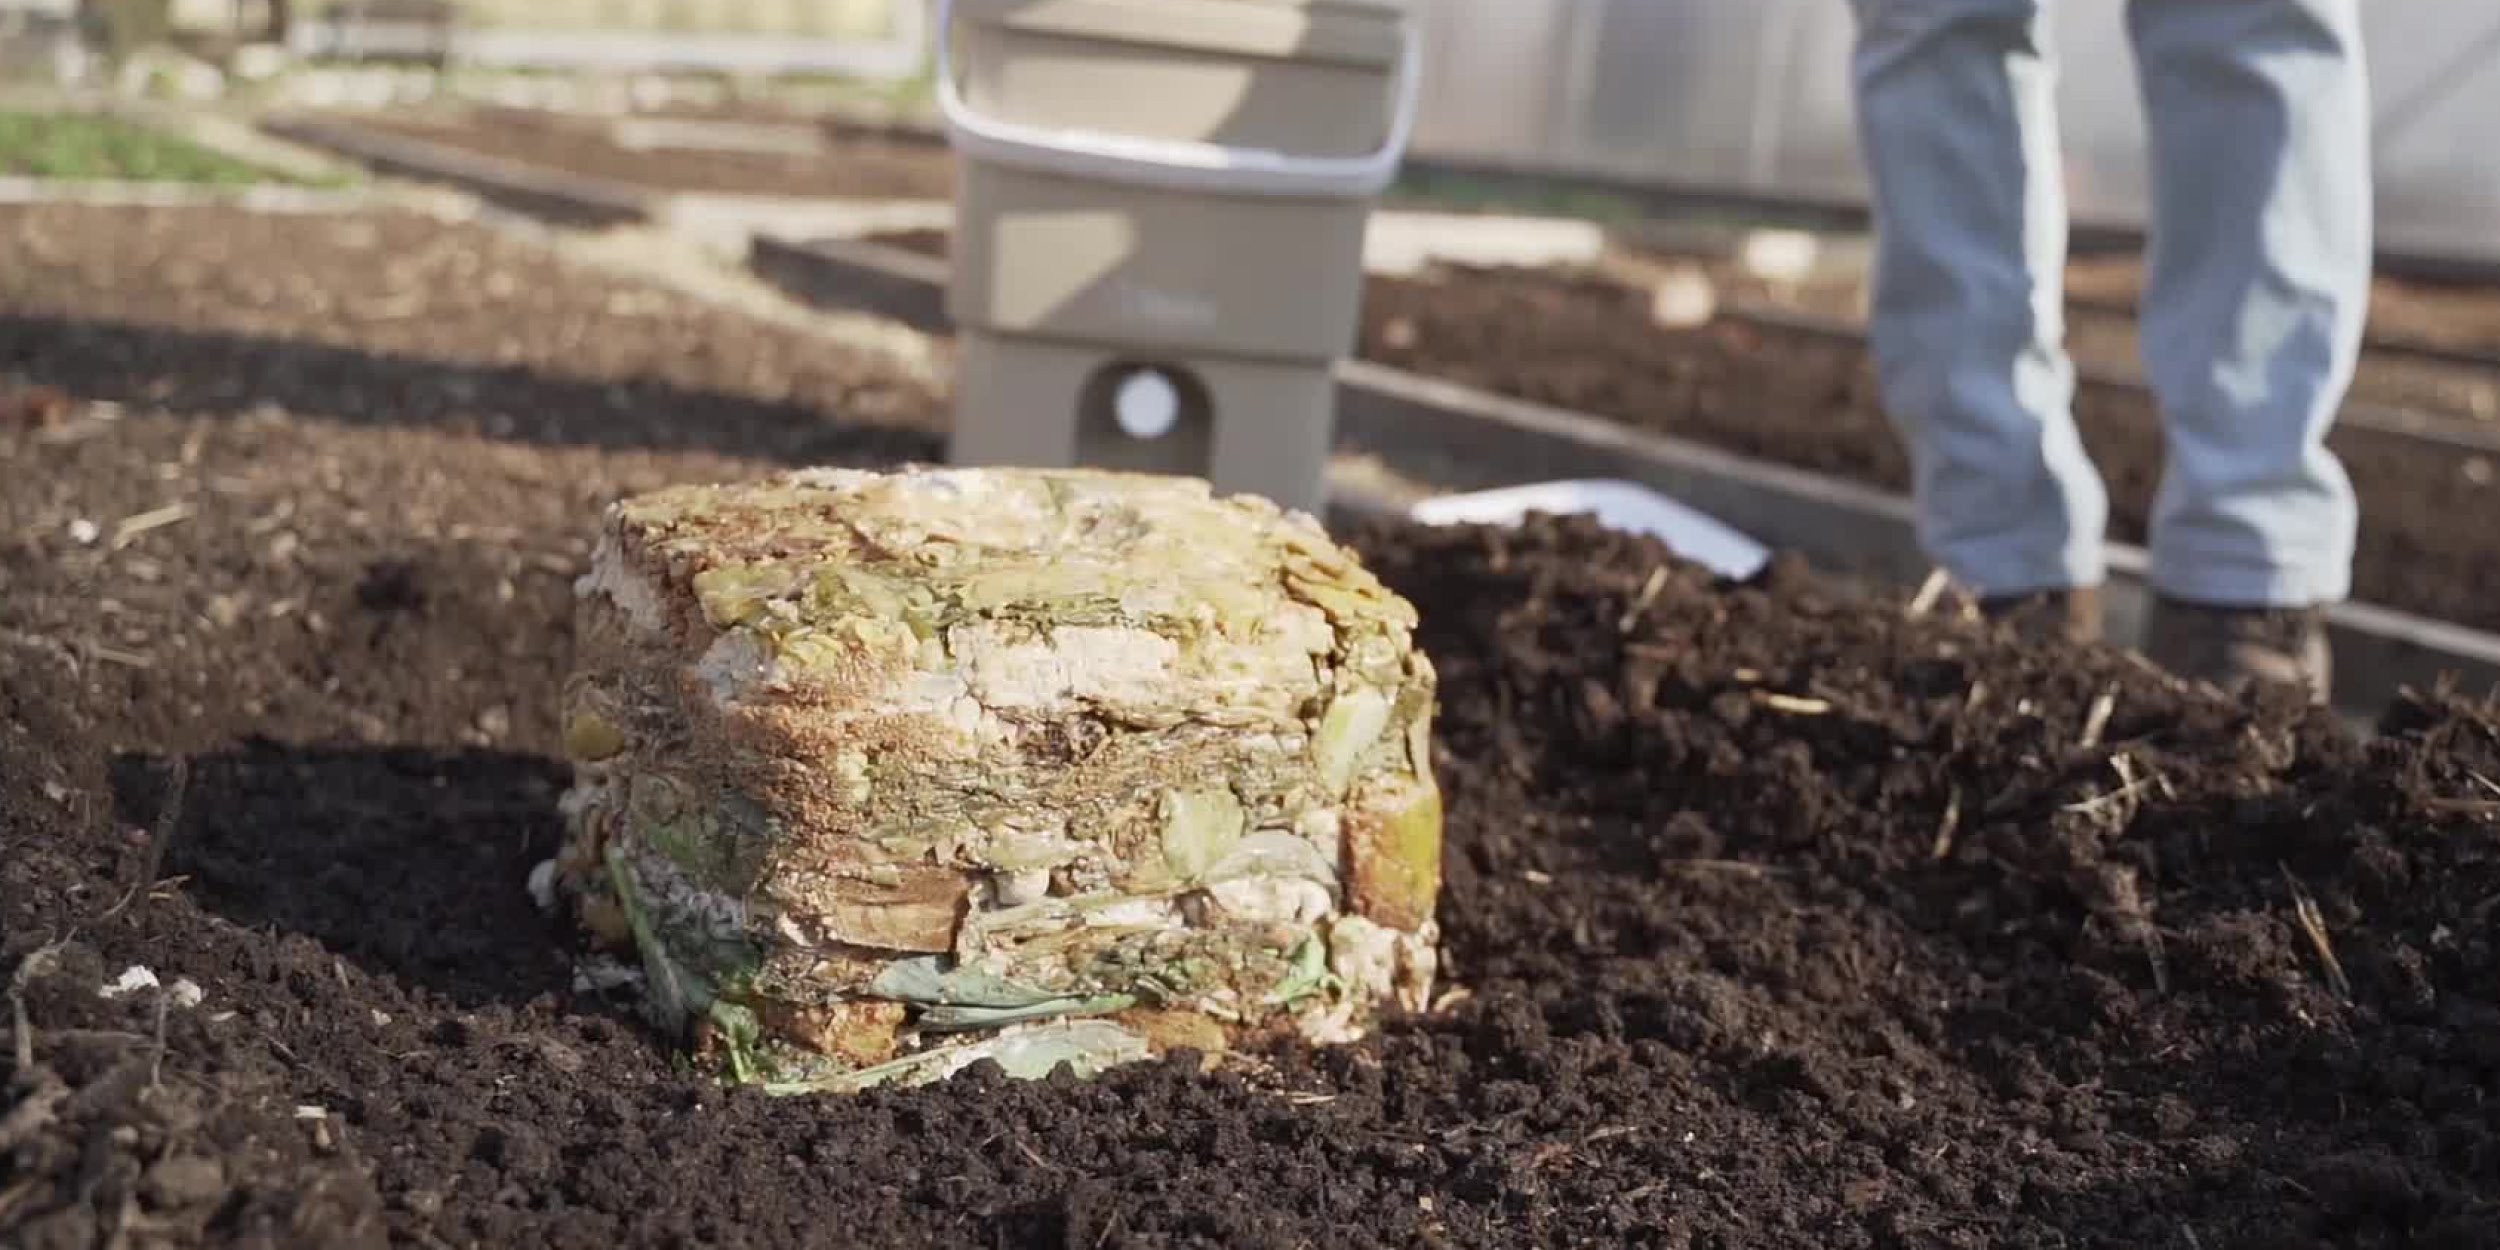 How long does it take to convert food into bokashi compost?